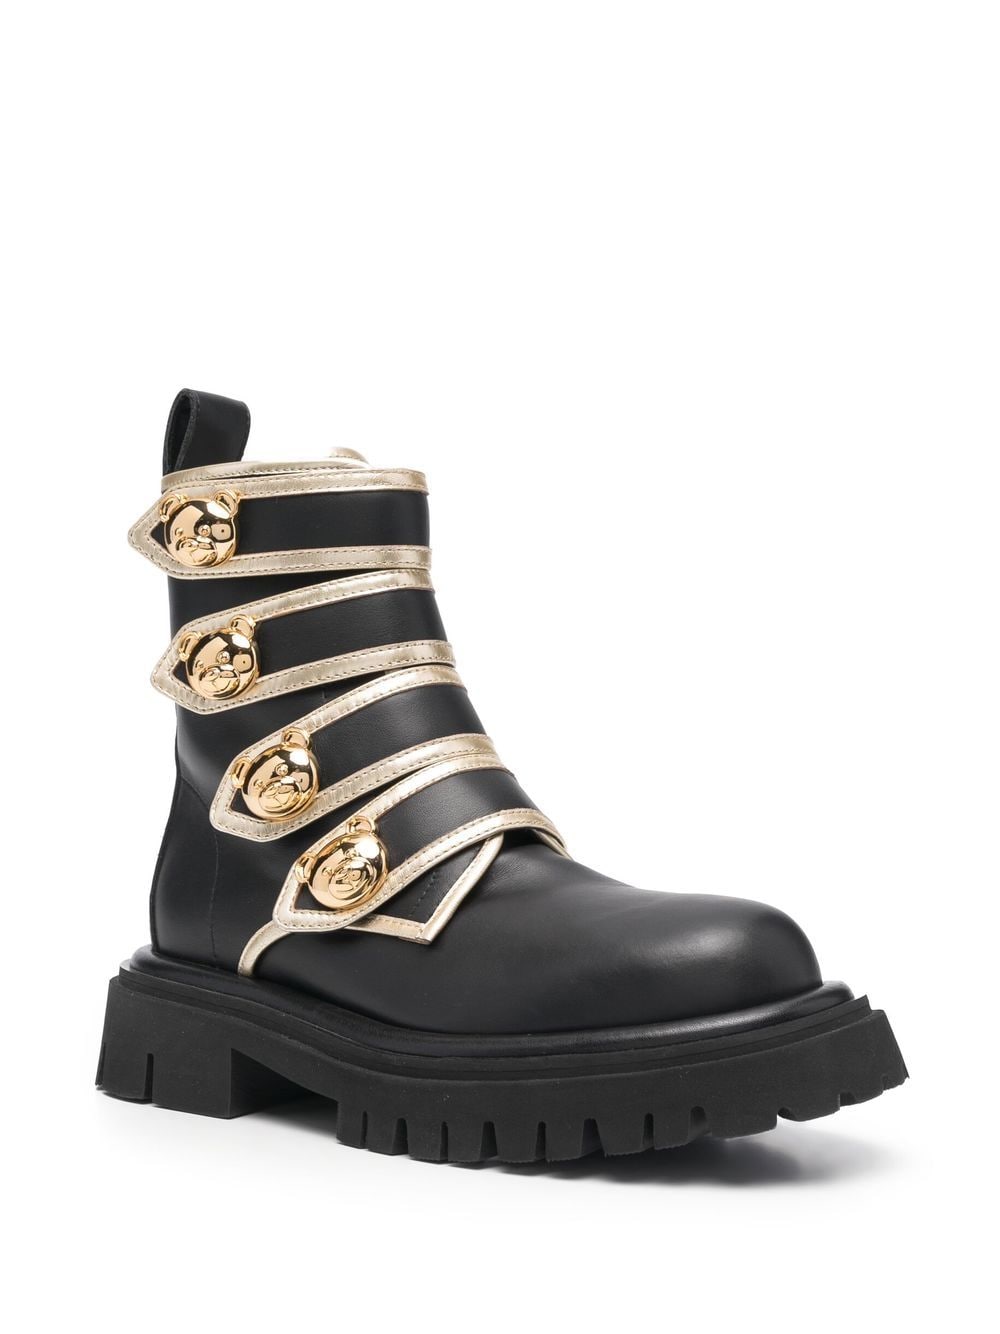 Moschino side-buckle Ankle Boots - Farfetch